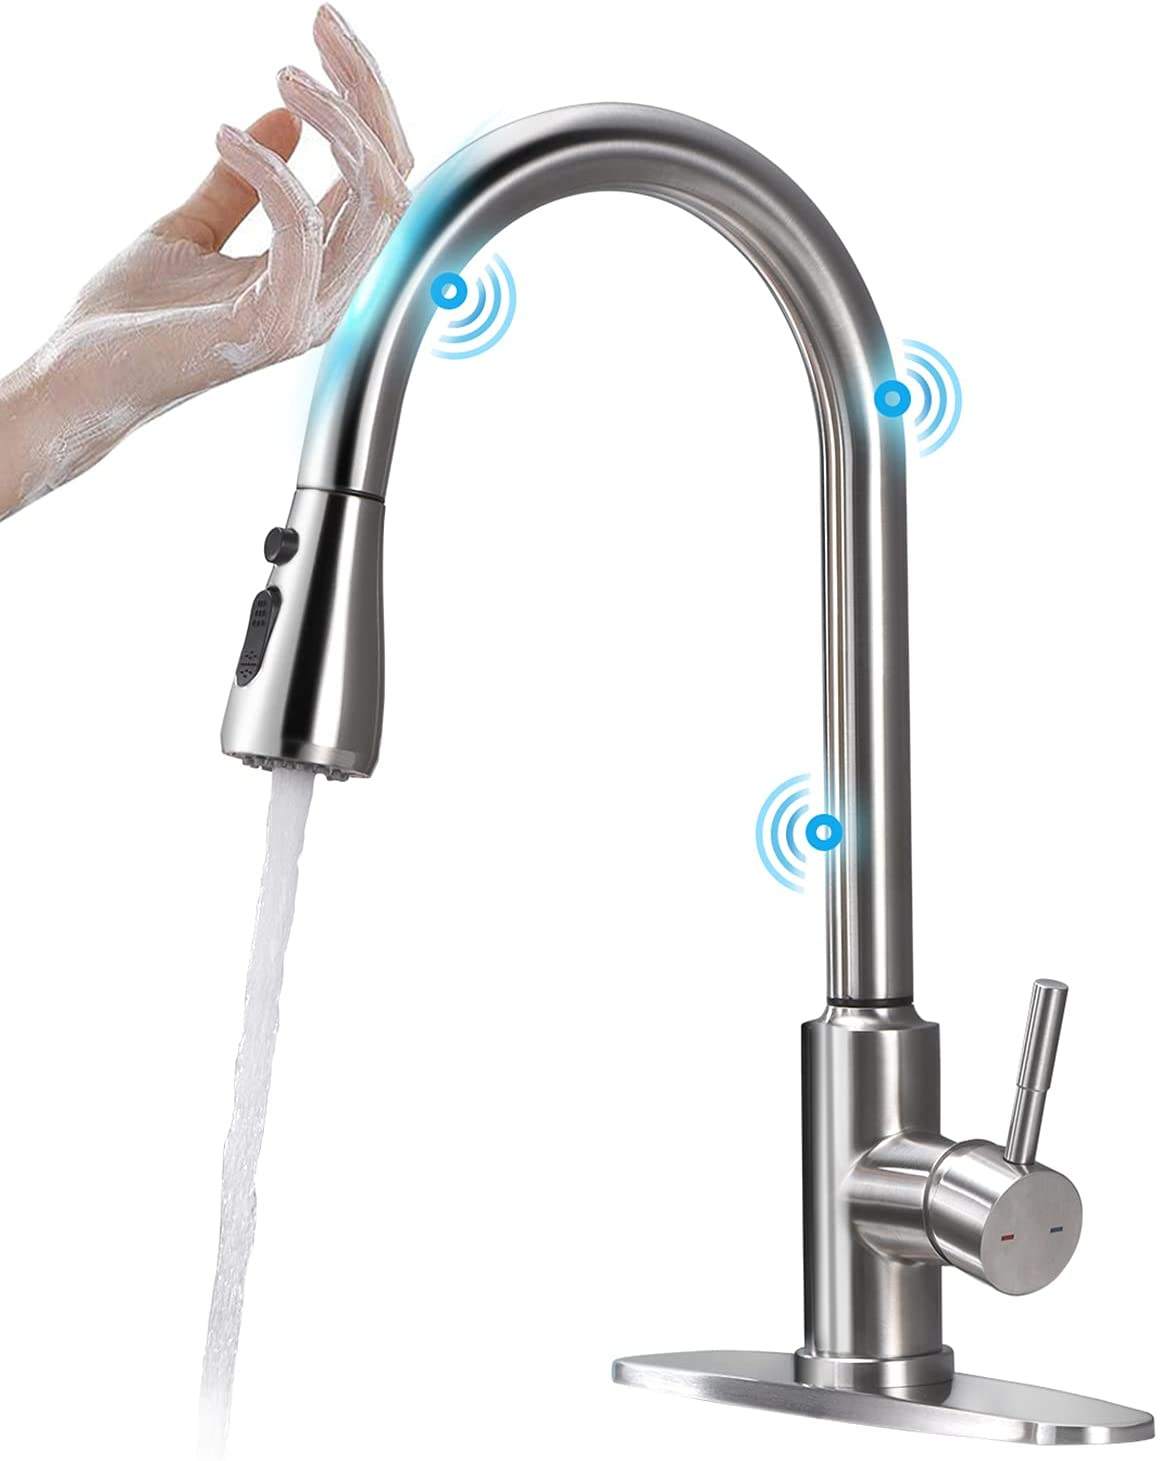 Modern Smart Touchless Sensor Kitchen Sink Faucet with Pull Down Sprayer